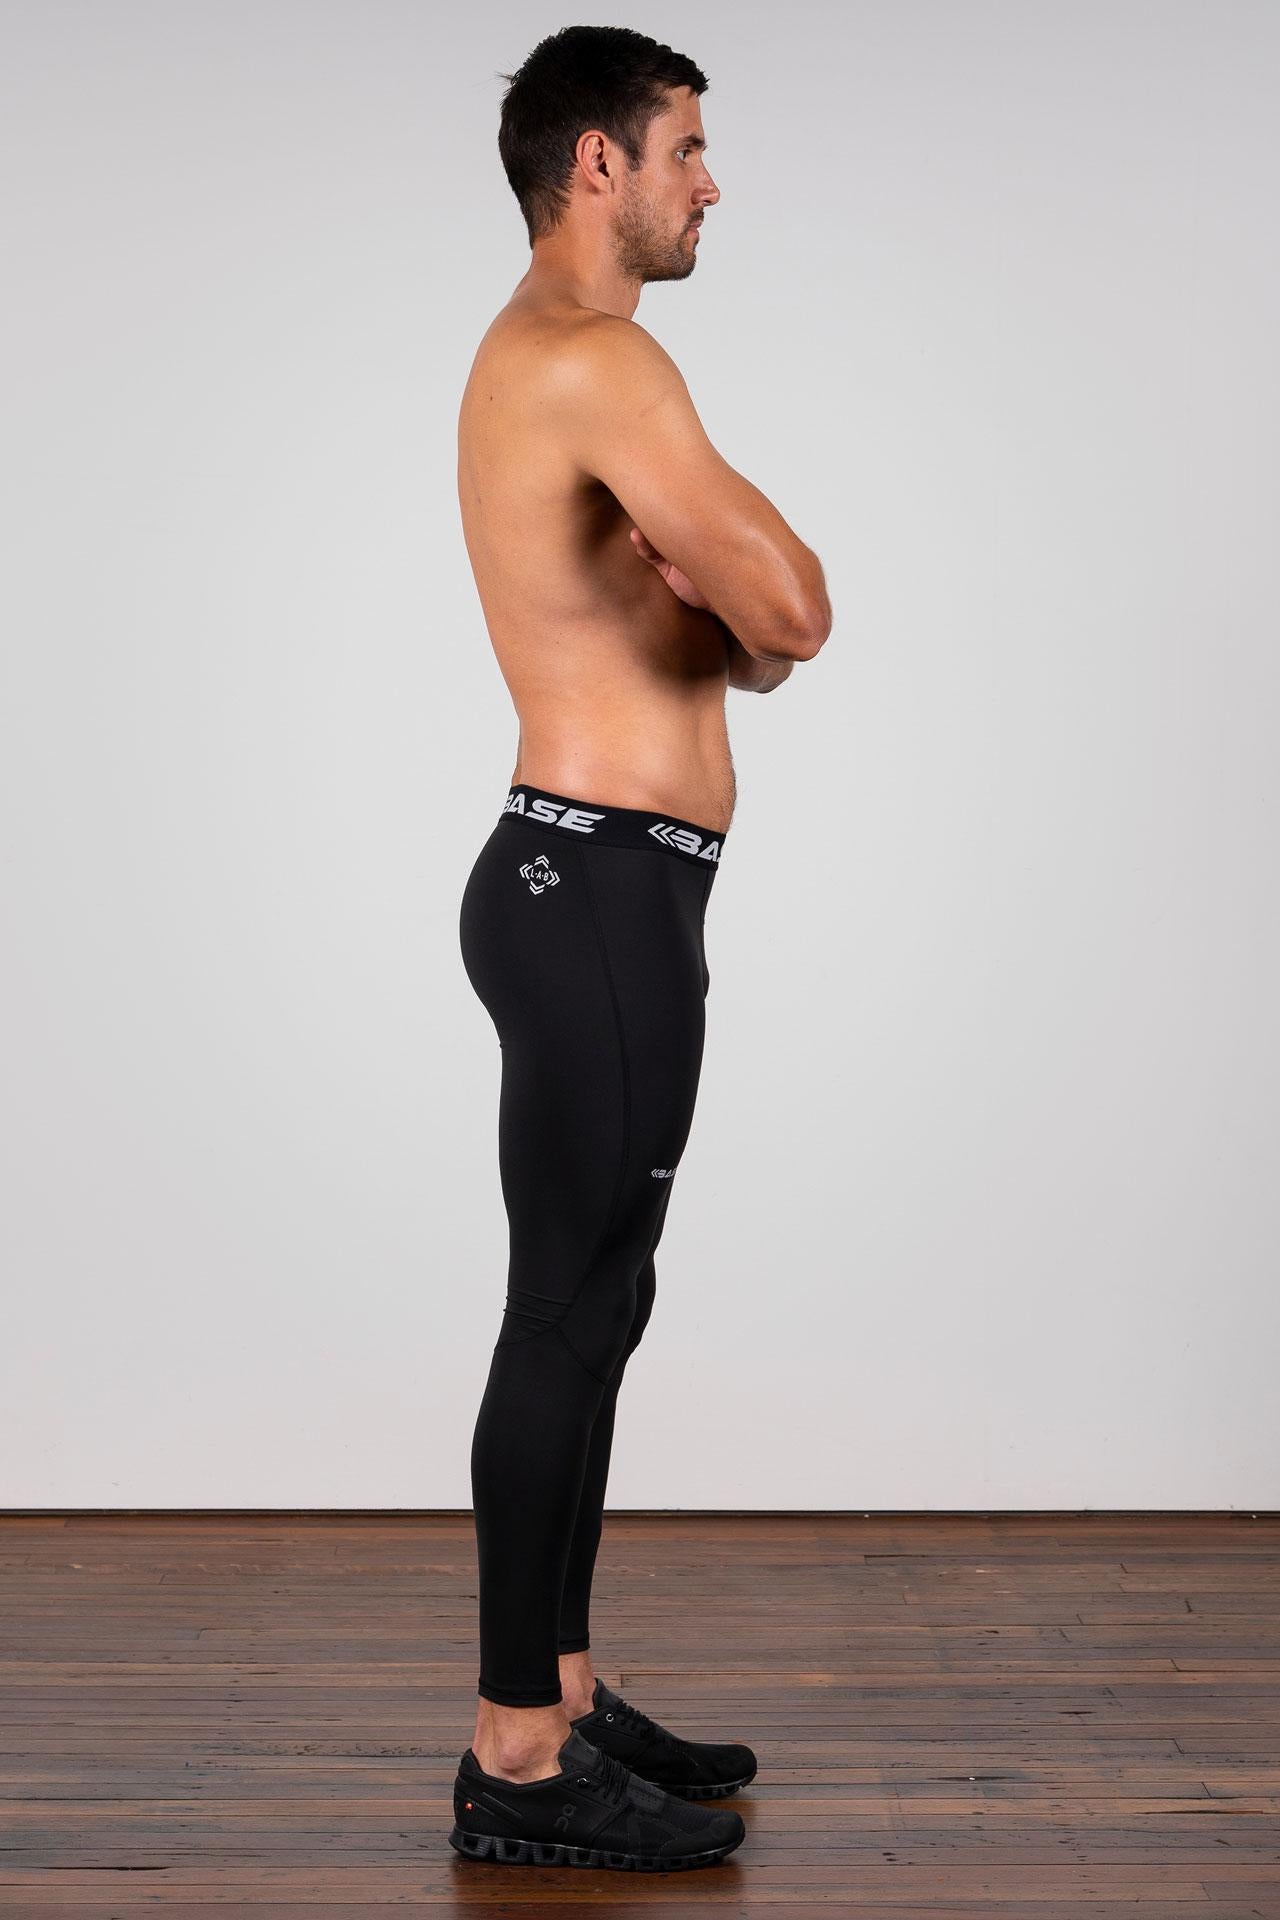 BASE Men's Recovery Tights - Black - Adelaide 36ers